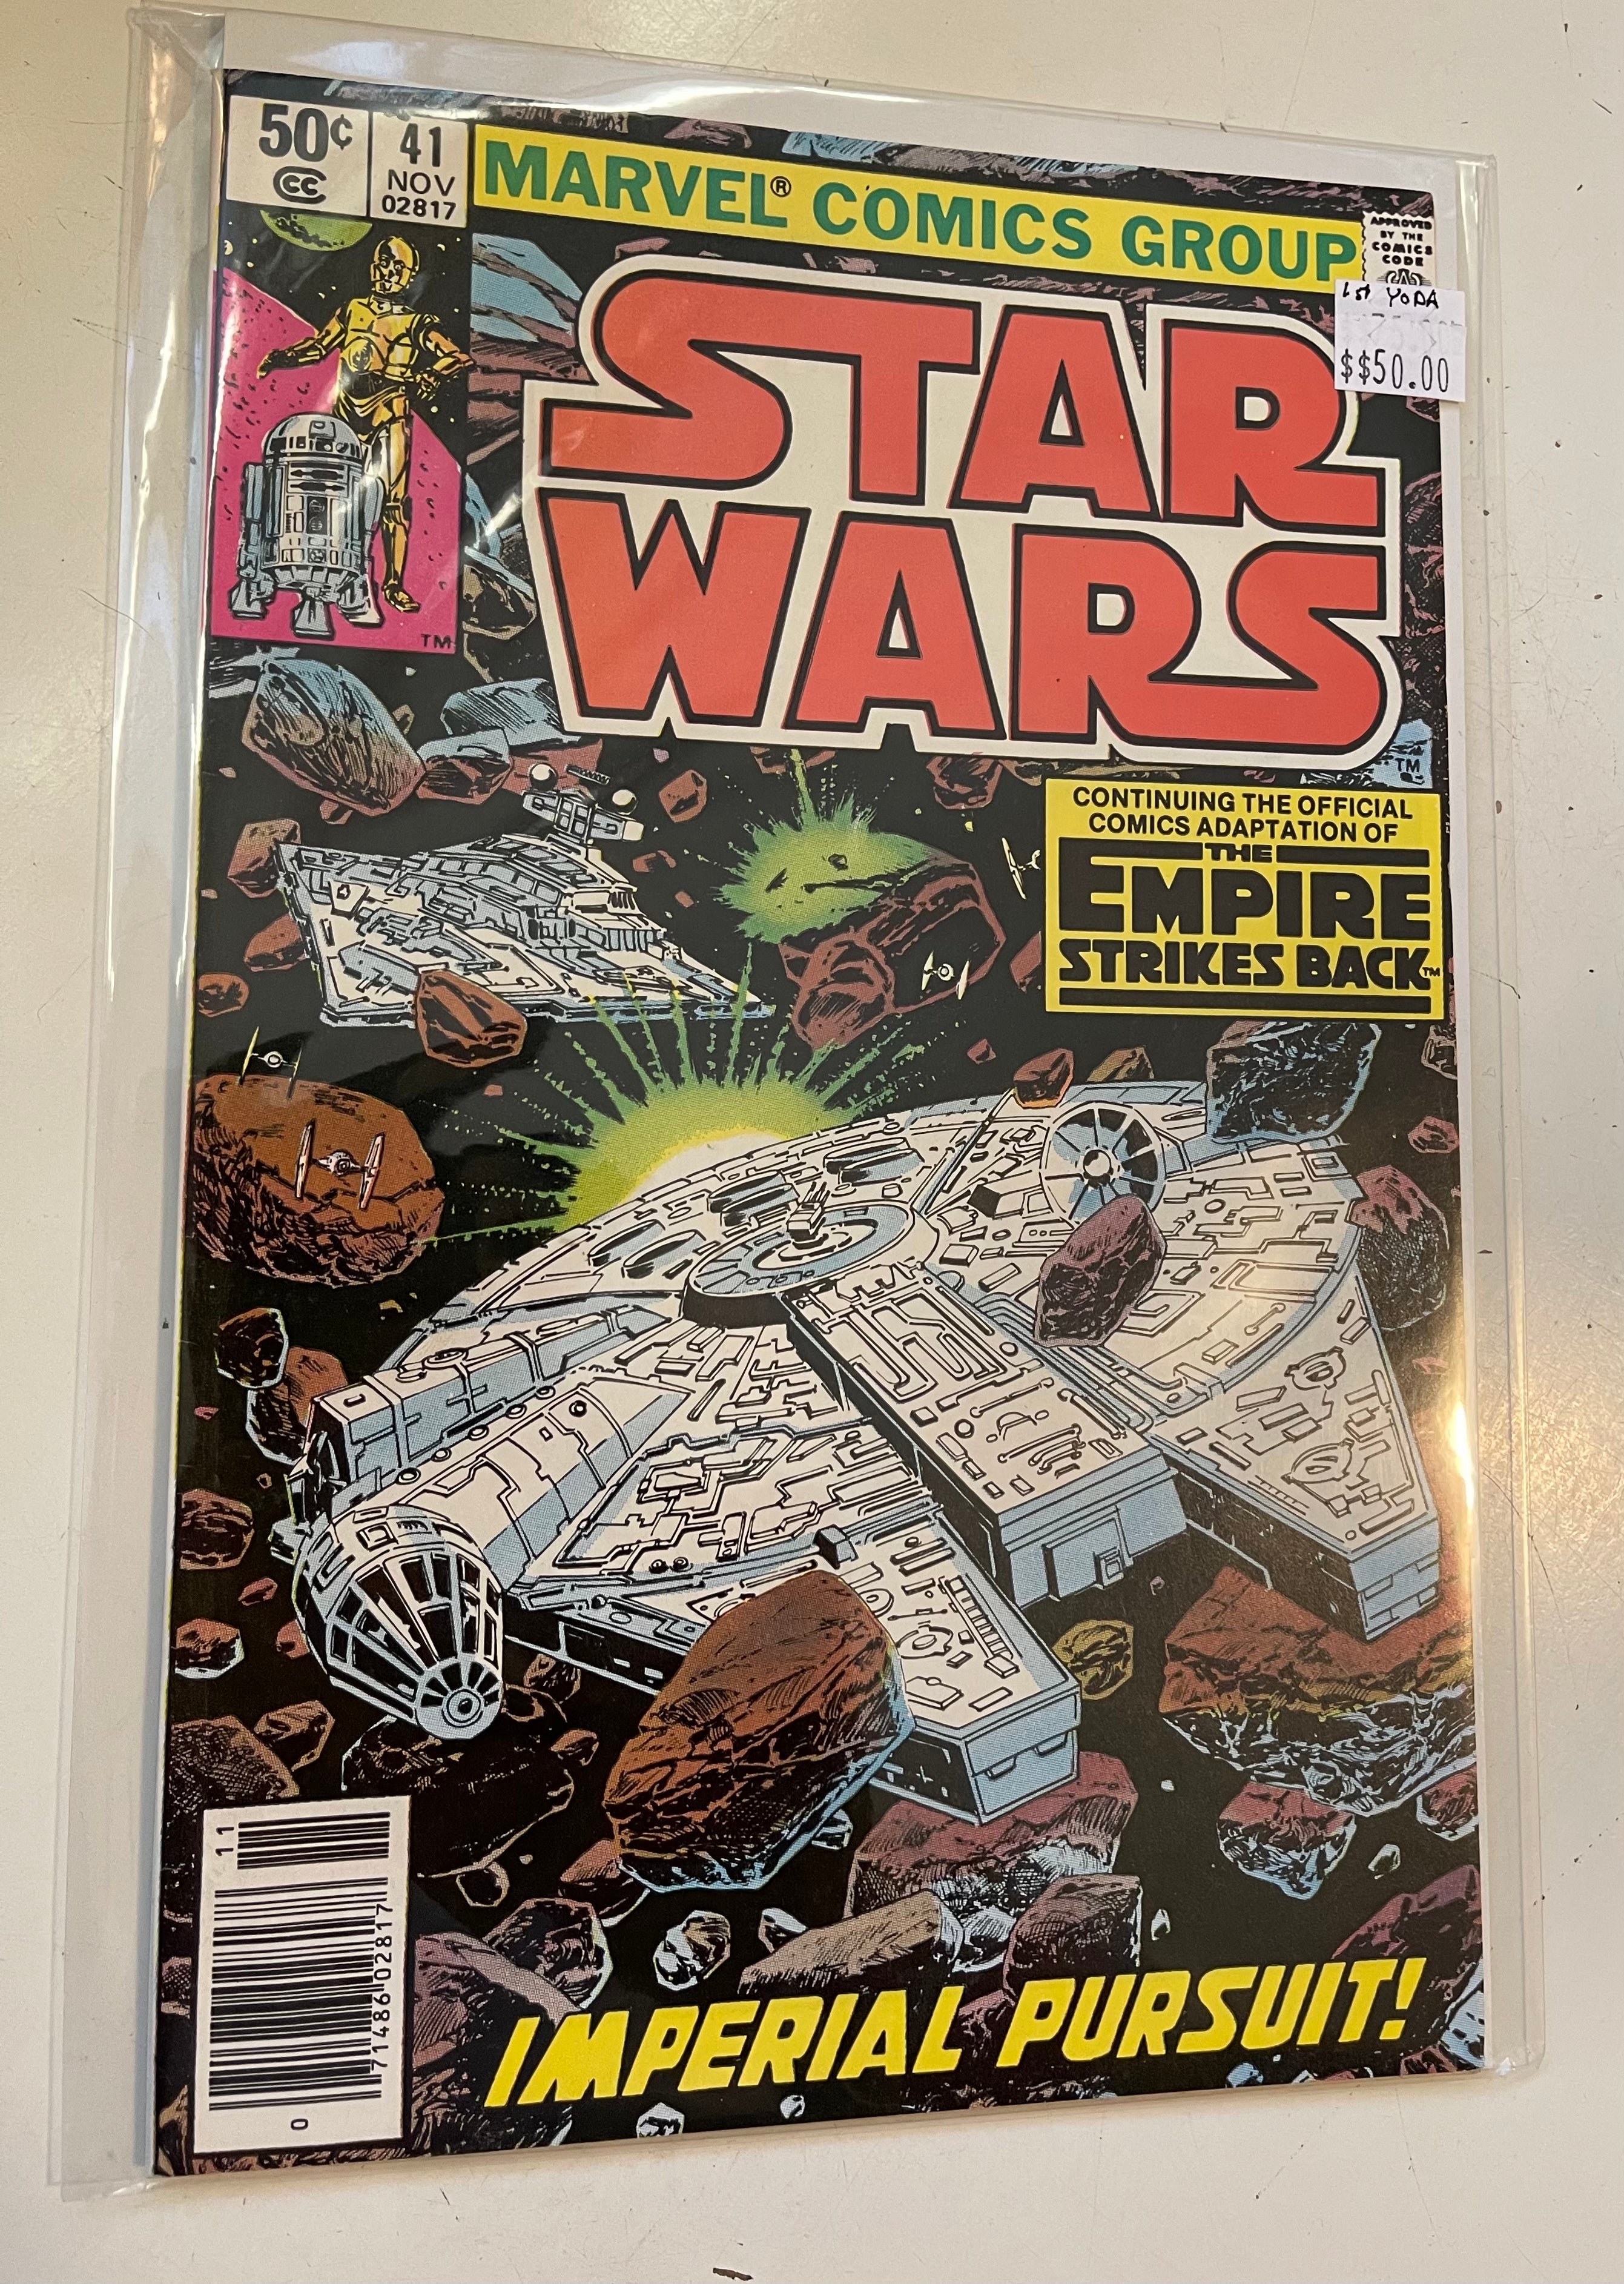 Star Wars #41 Vf or better condition comic book